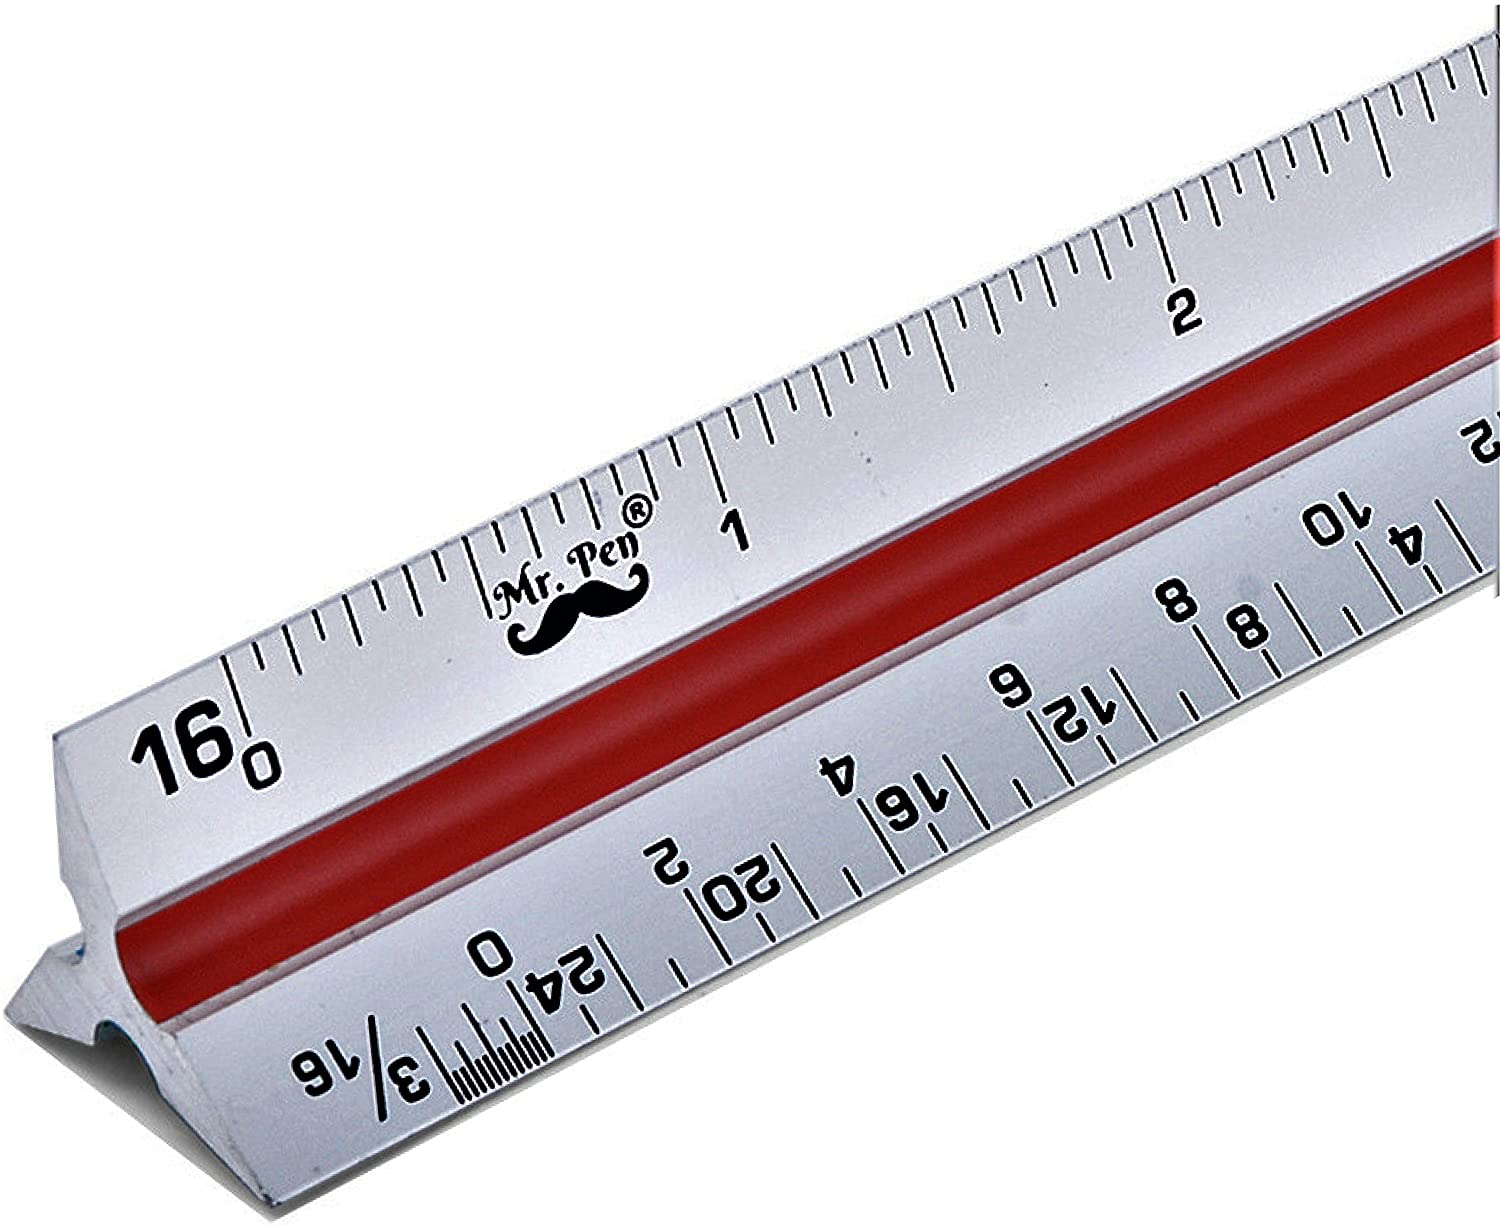 Detail To Scale Ruler Image Nomer 9